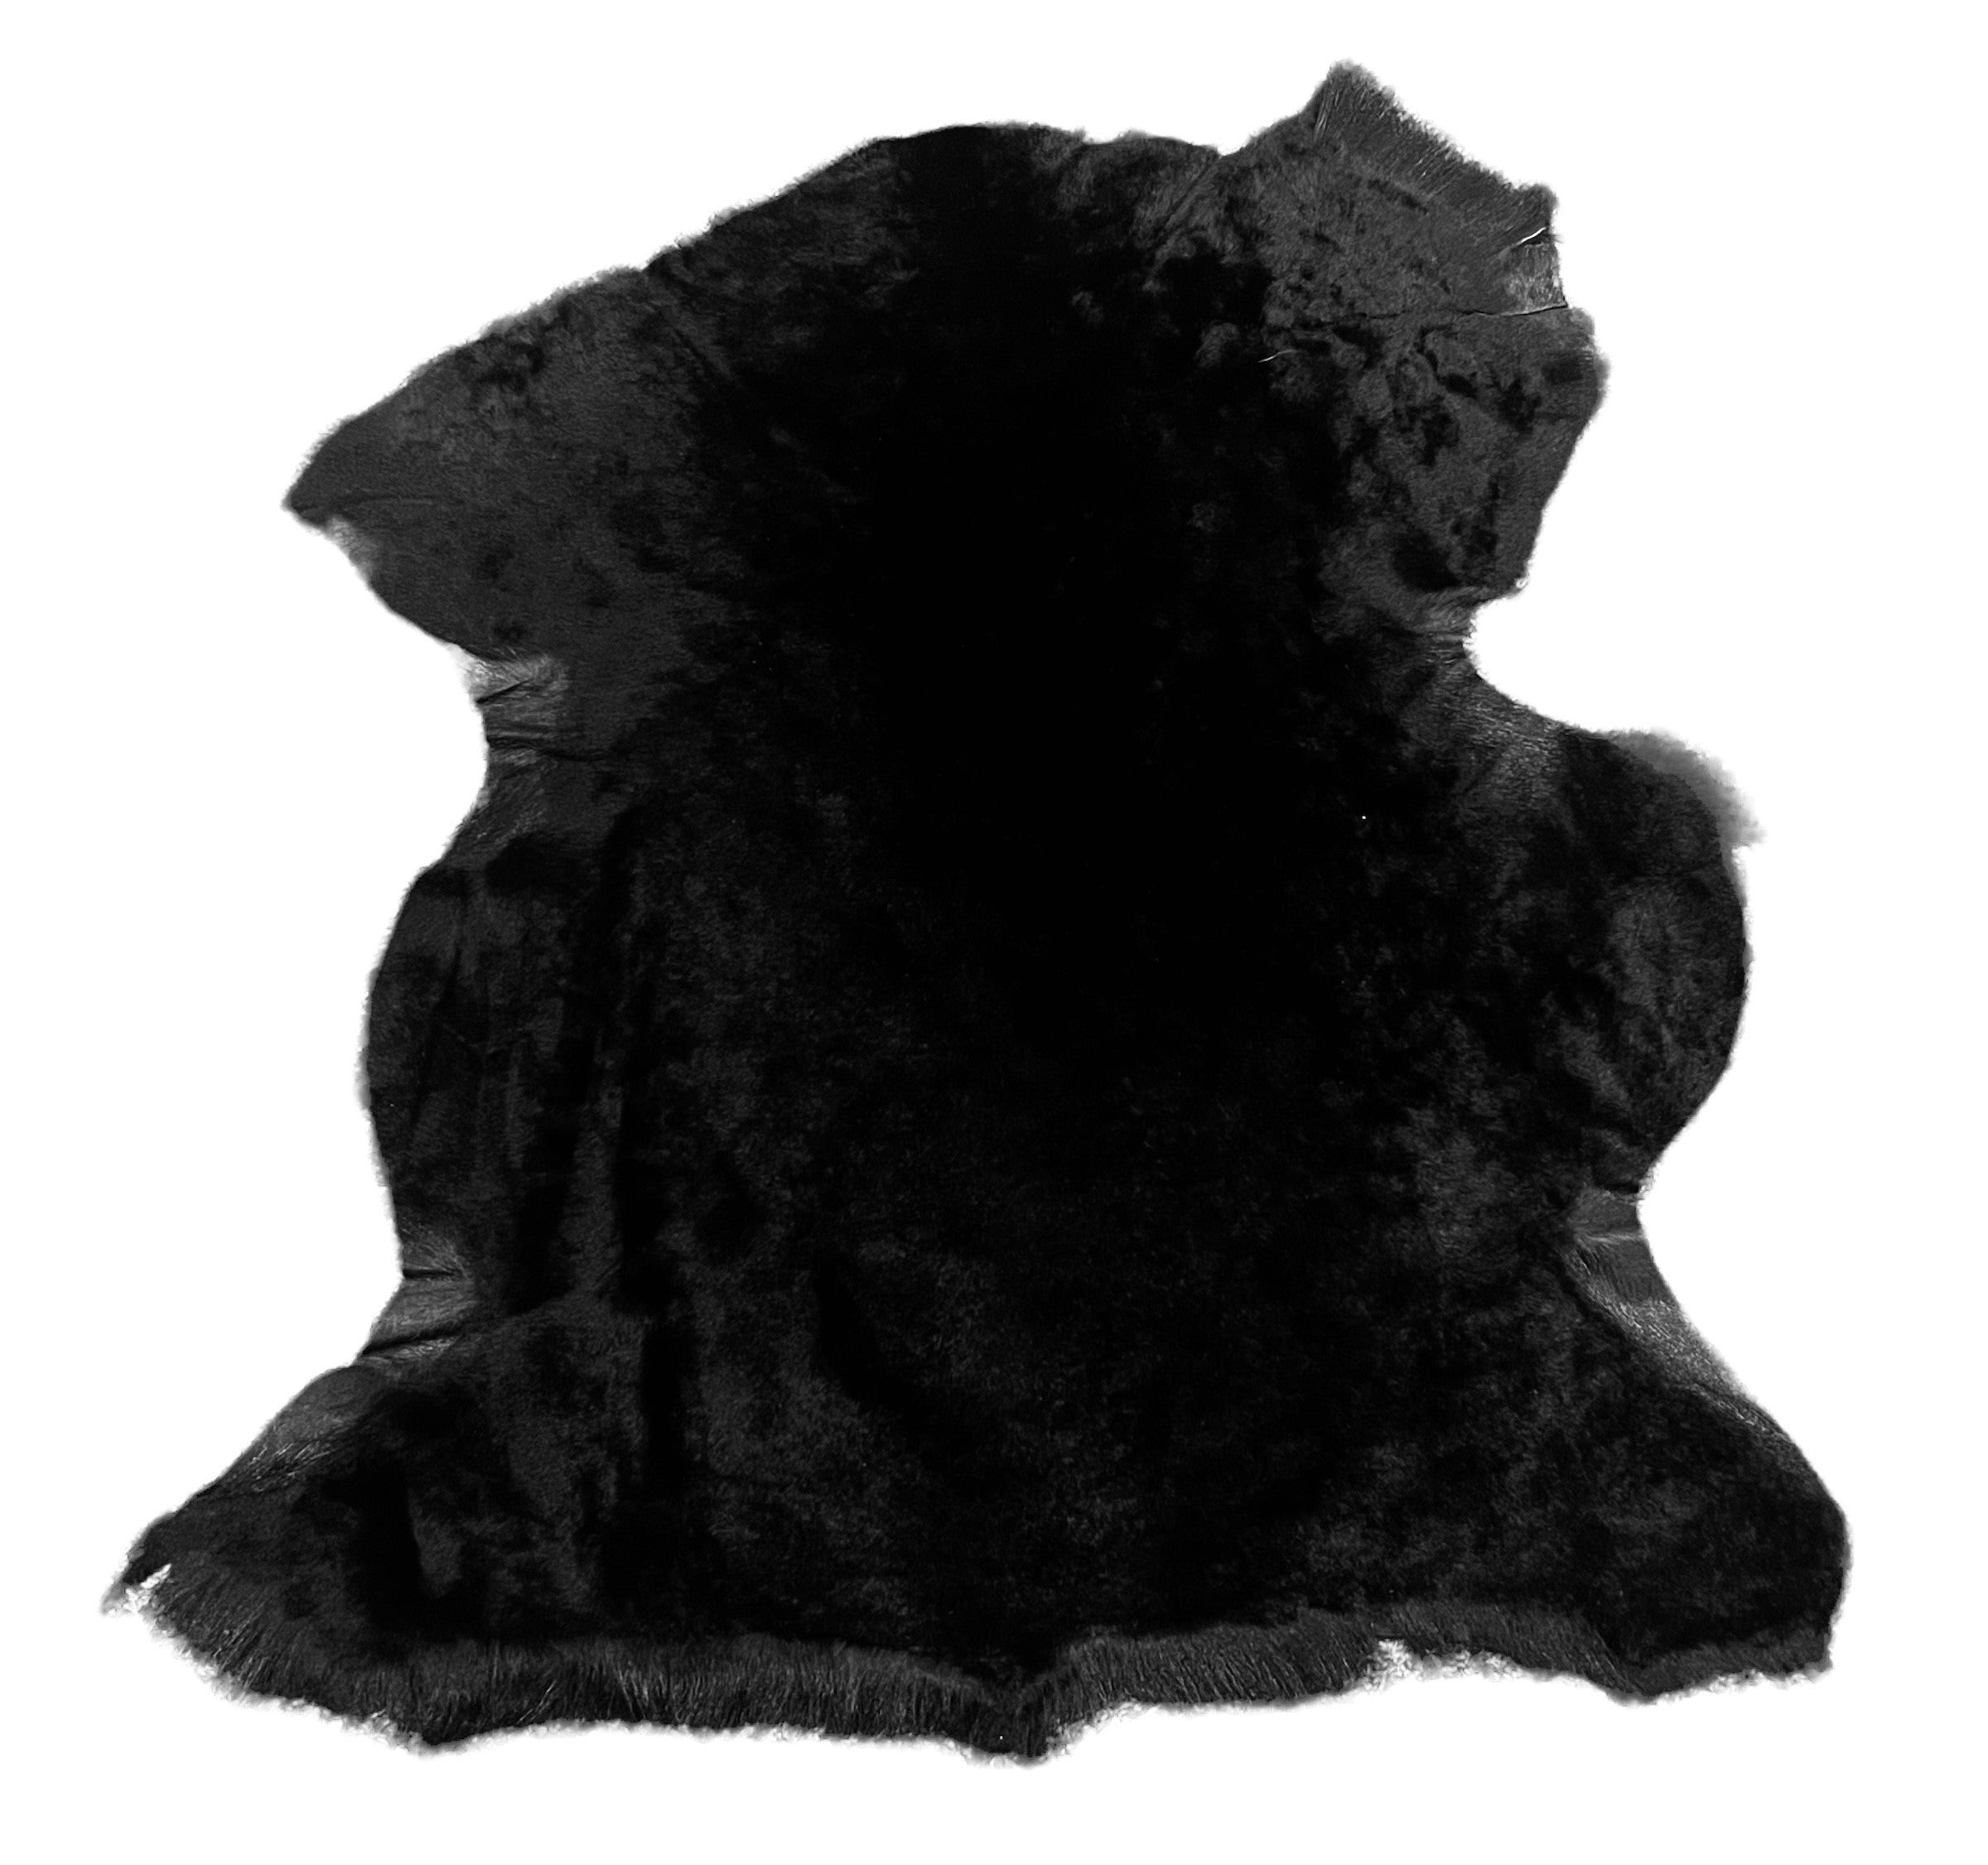 Shaved Toscana Black : 10 Piece Straight Wool Shearling Bundle with Suede Reverse (Ref-gh.eol)